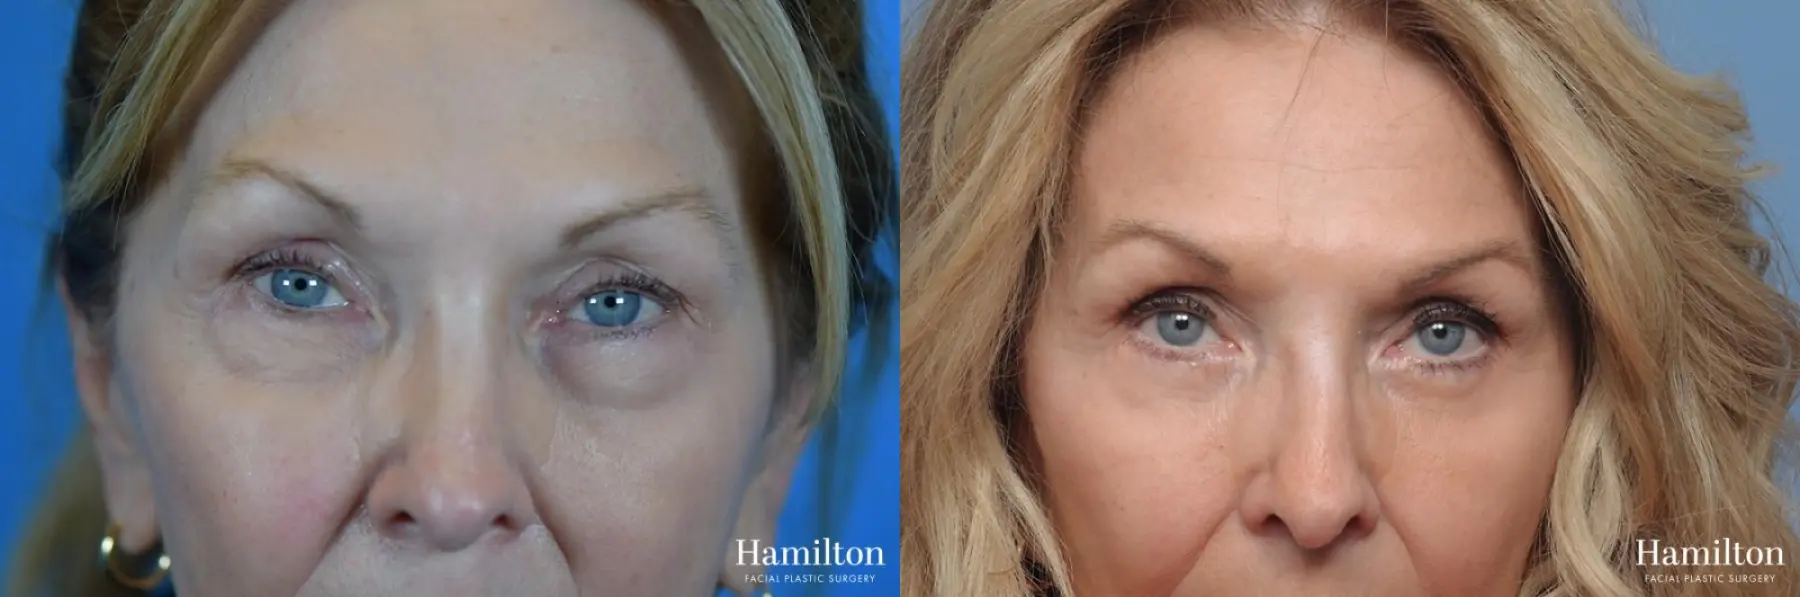 Blepharoplasty: Patient 5 - Before and After 1